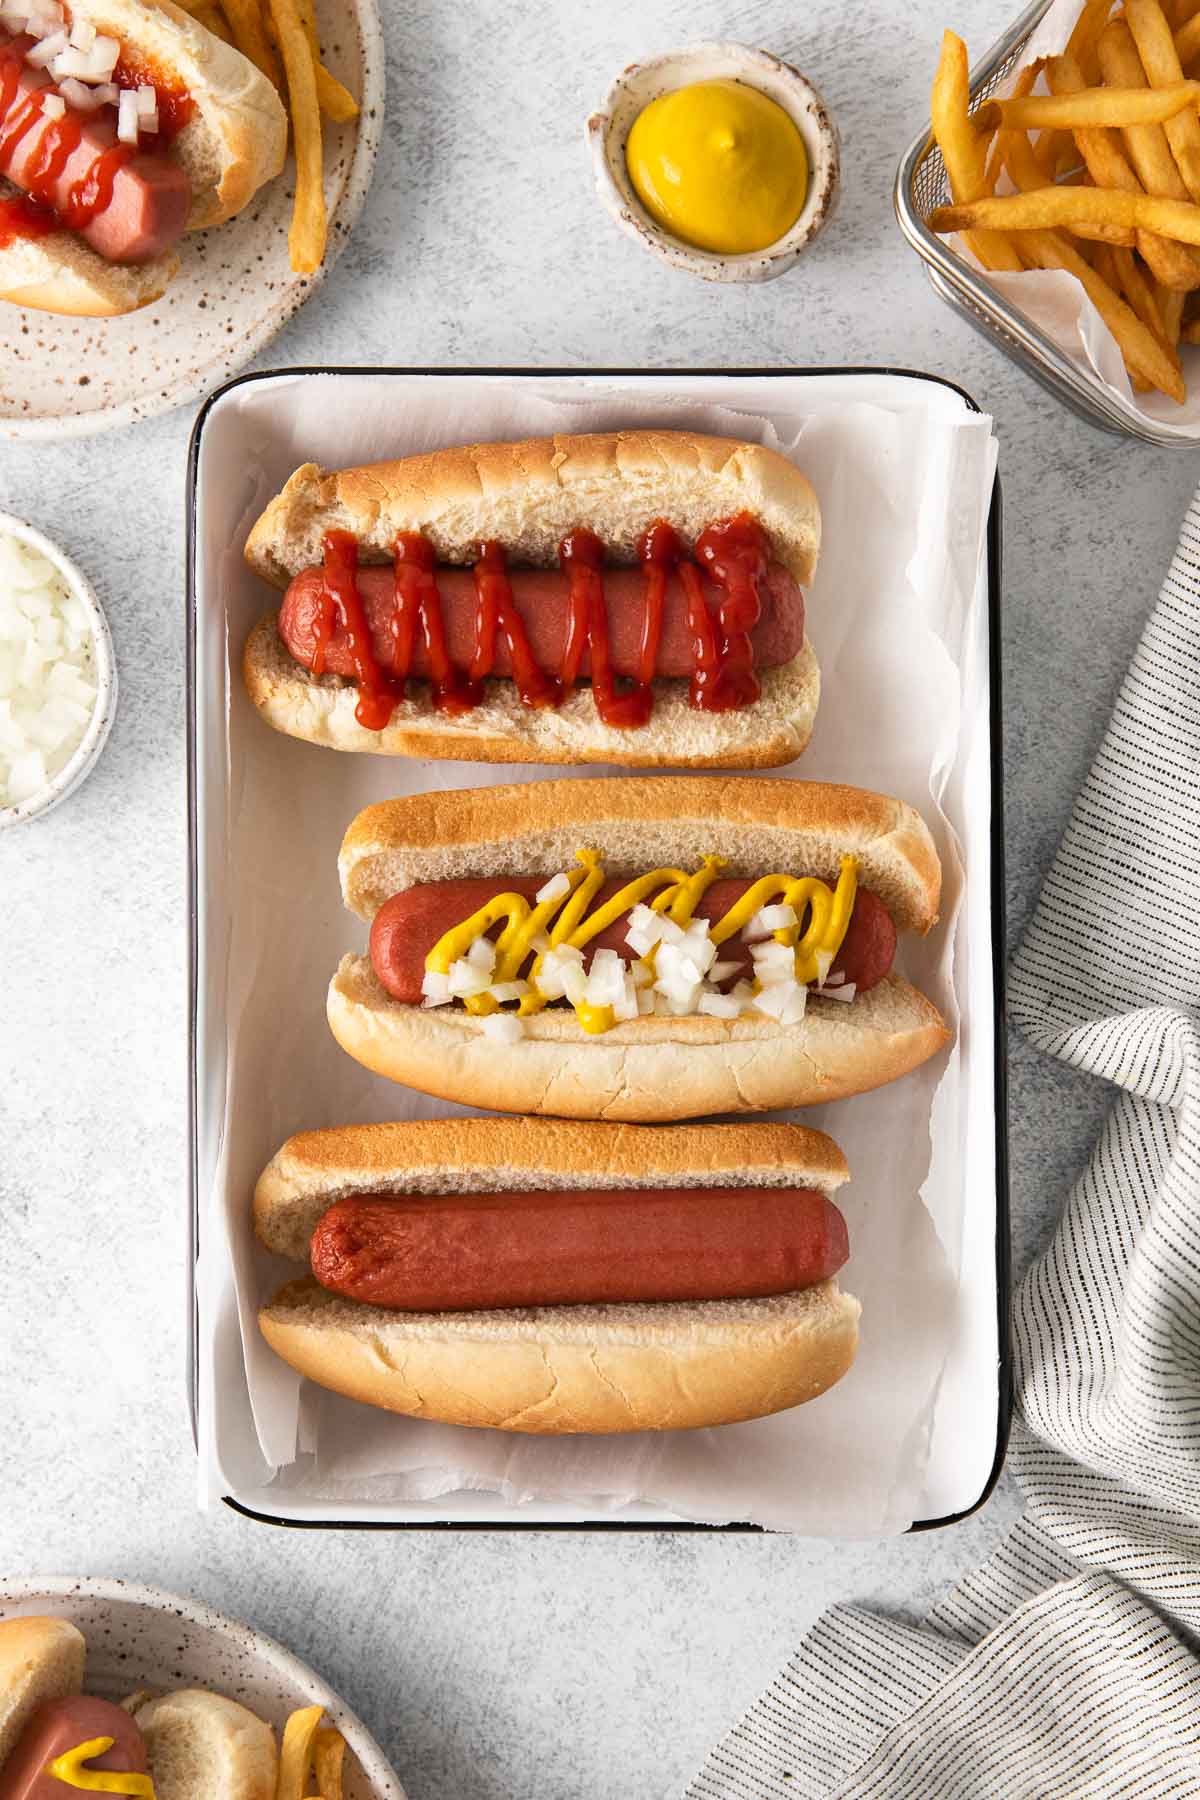 Three hot dogs with toppings on a serving platter.